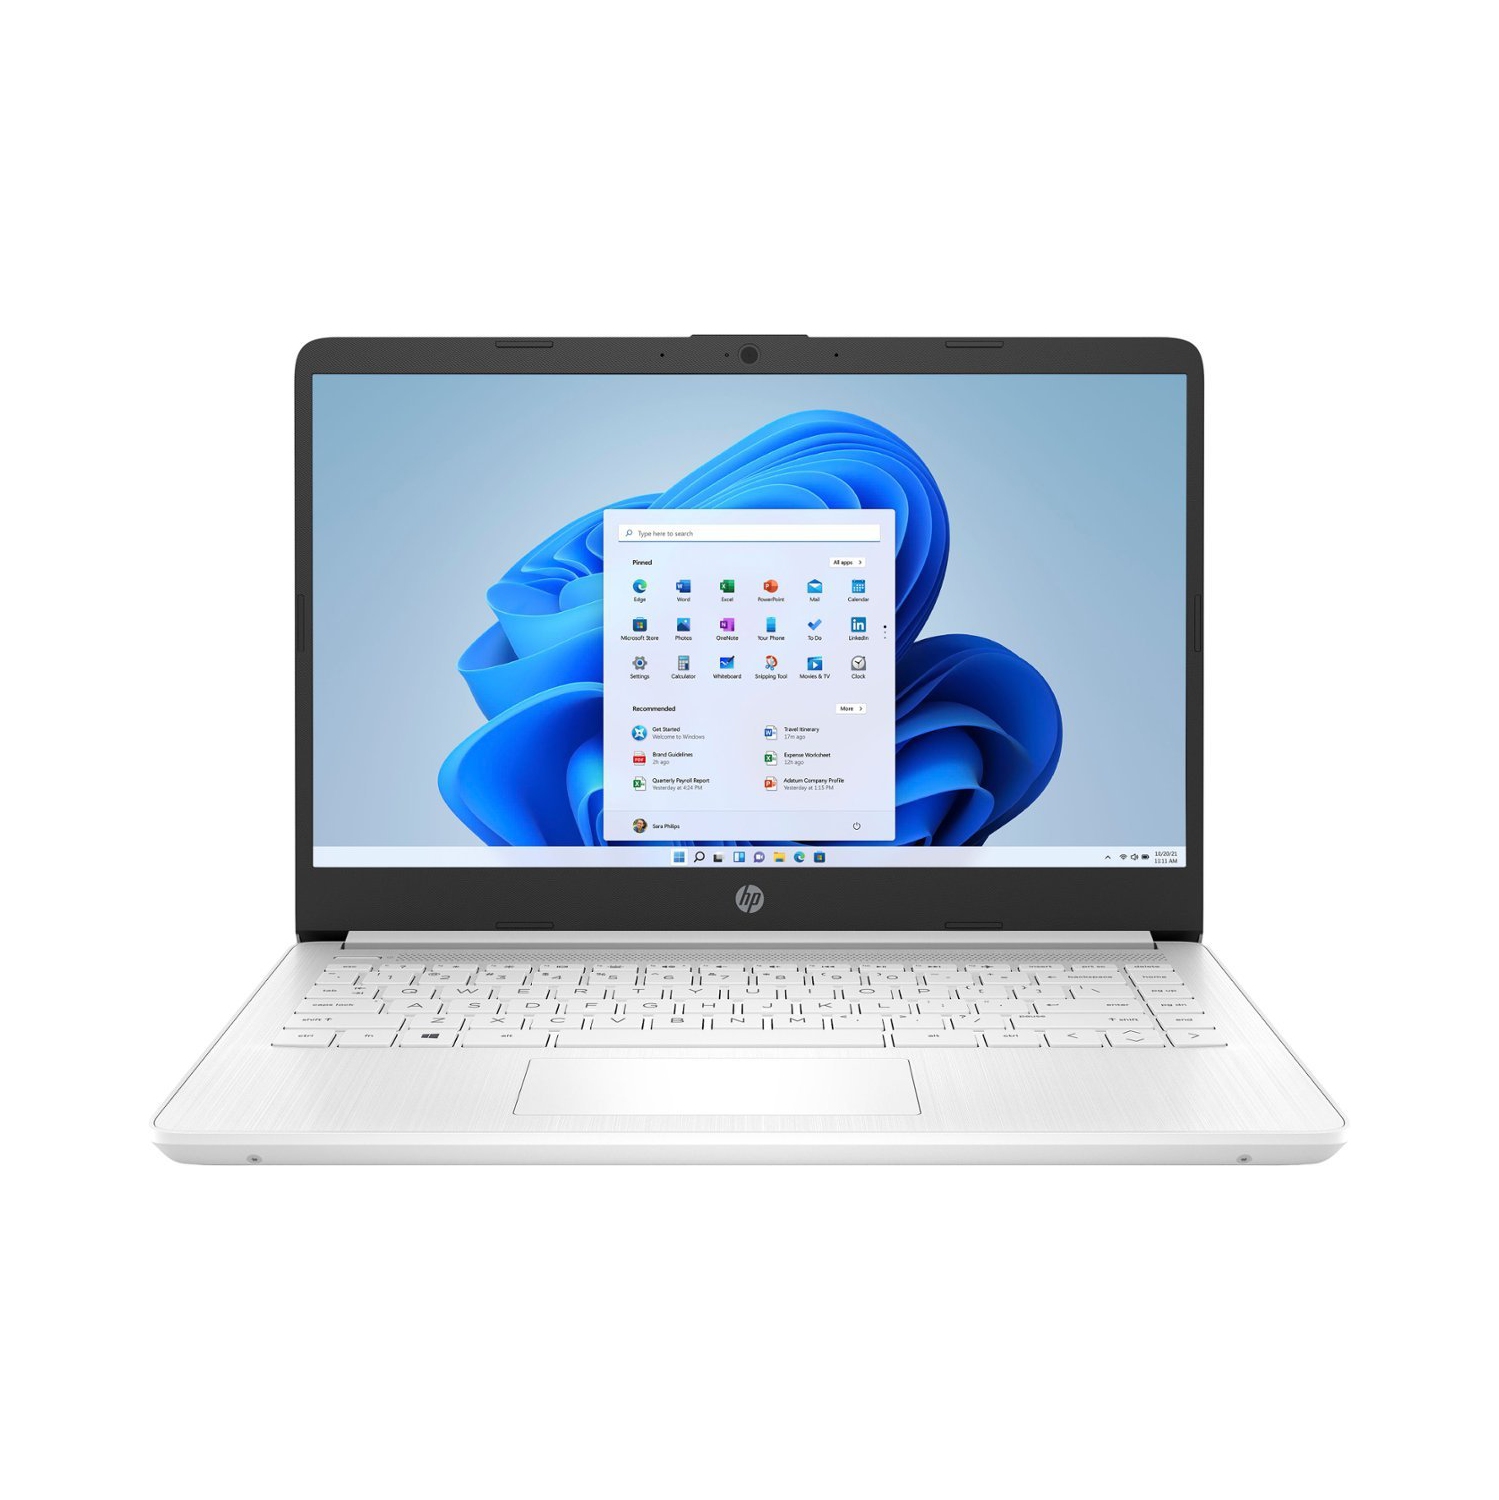 HP Stream 14" Laptop PC - Intel Celeron N4120, 16GB RAM, 64GB eMMC, White, Windows 11 (S Mode), Comes with One Year of Microsoft 365 Subscription